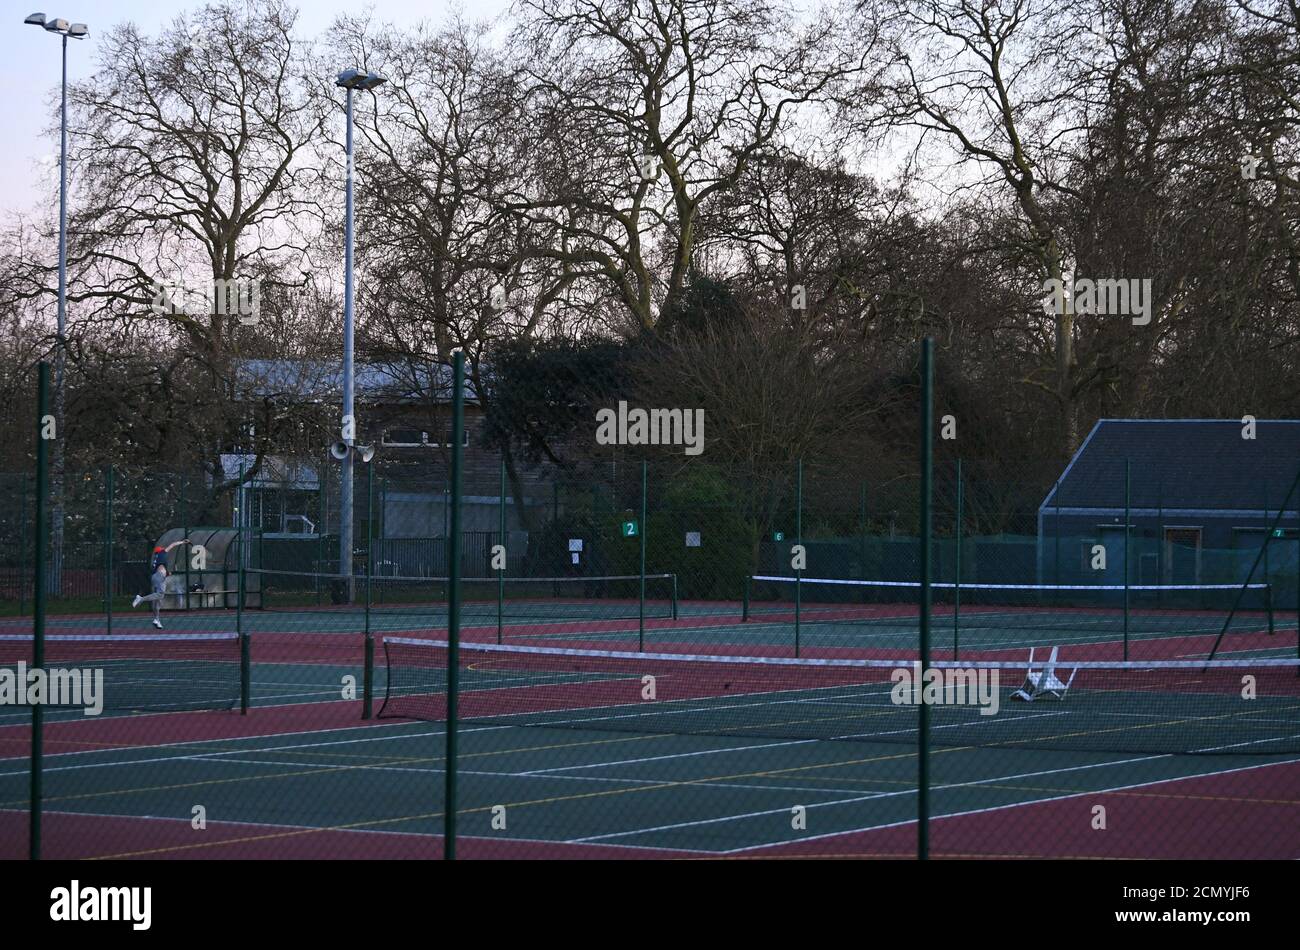 Empty Tennis Courts High Resolution Stock Photography And Images Alamy